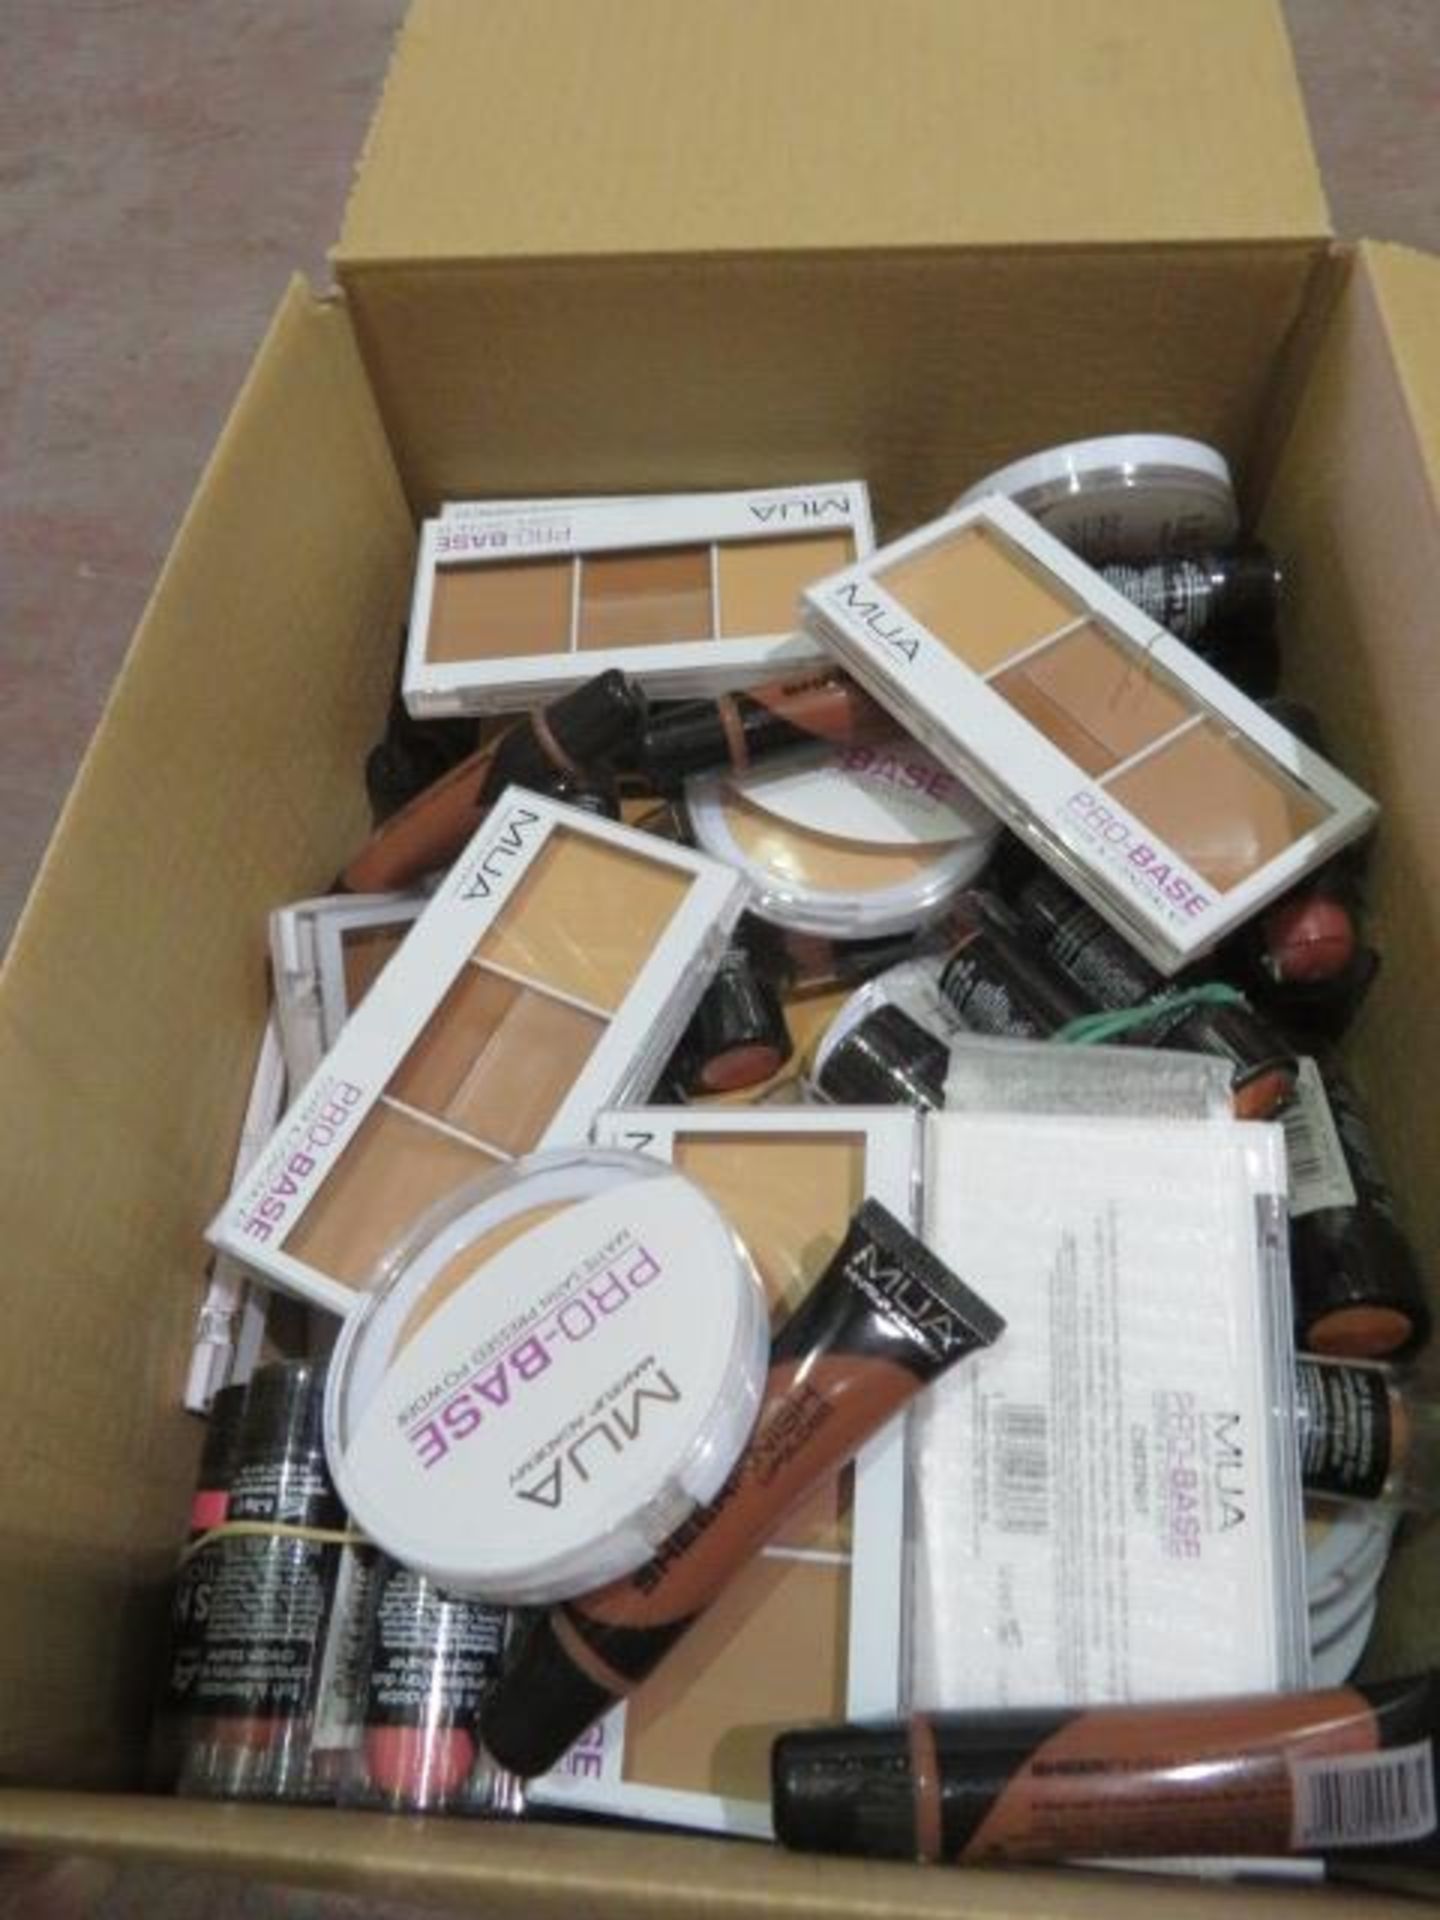 (Z187) Circa. 200 items of various new make up acadamy make up to include: lip gloss, lip stick...